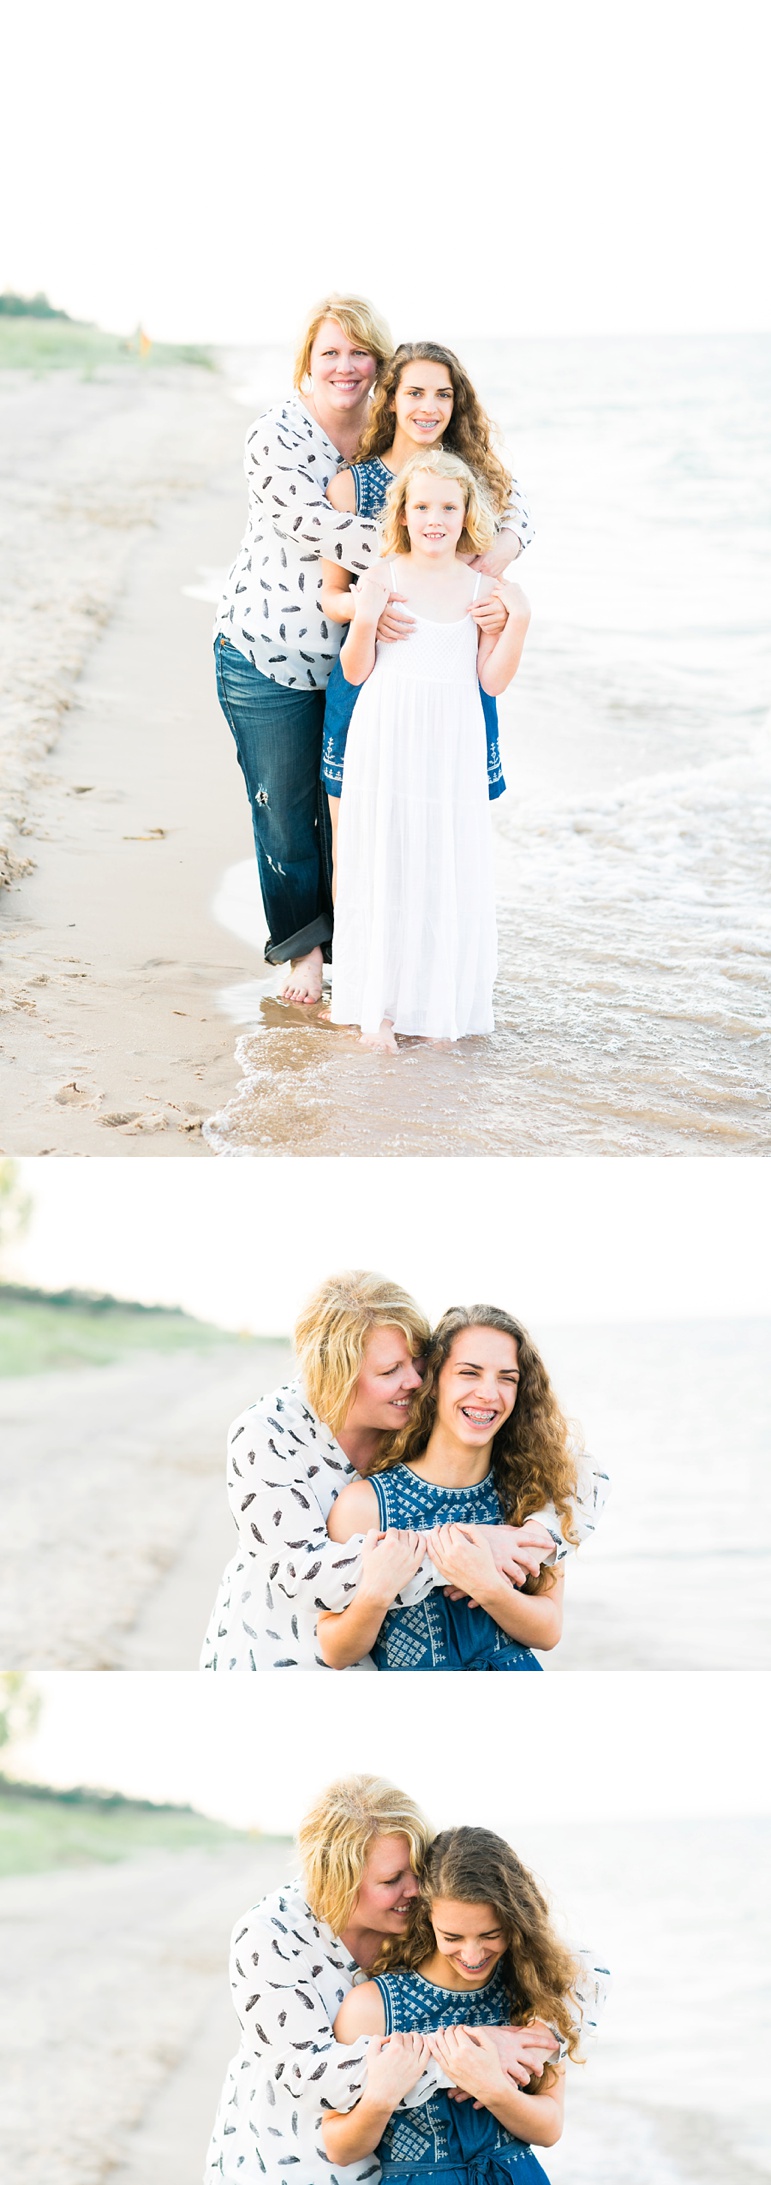 Milwaukee WI Wedding Photographers, Green Bay WI Wedding, Karen Ann Photography, Door County, Denver Wedding Photographers, Beach Family Session, Two Rivers Point Beach State Park